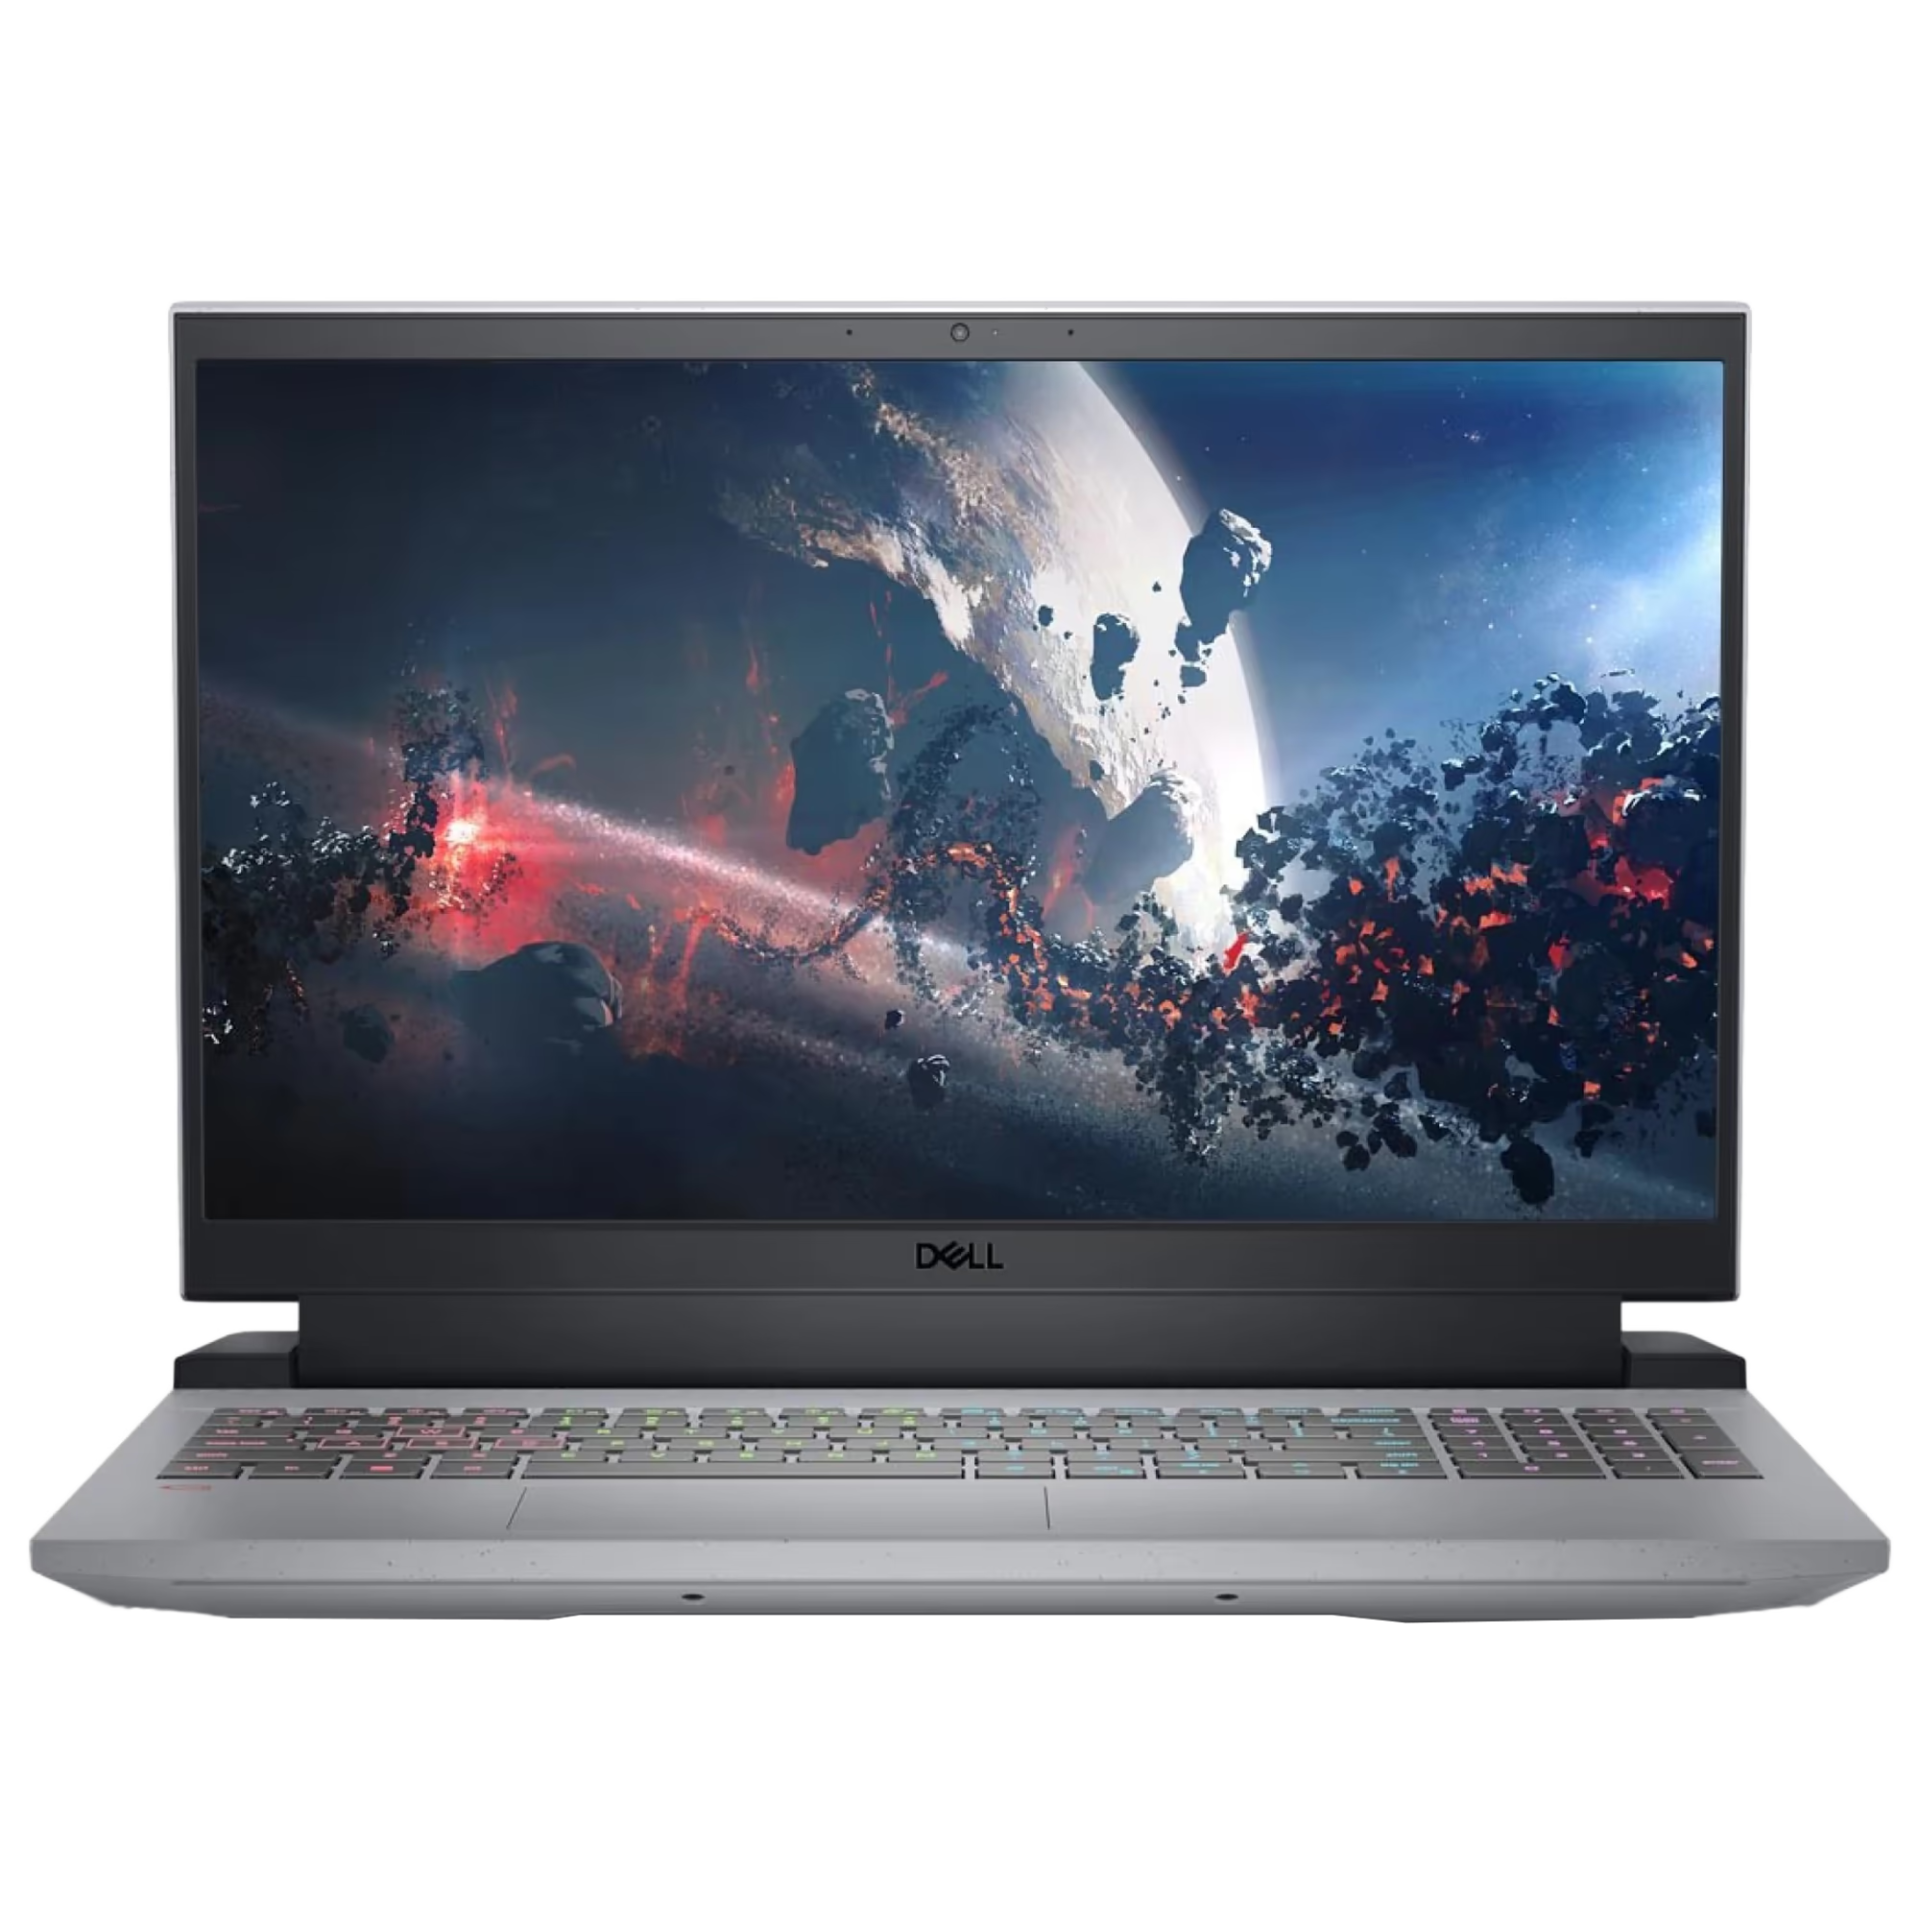 Best Laptop For Warzone